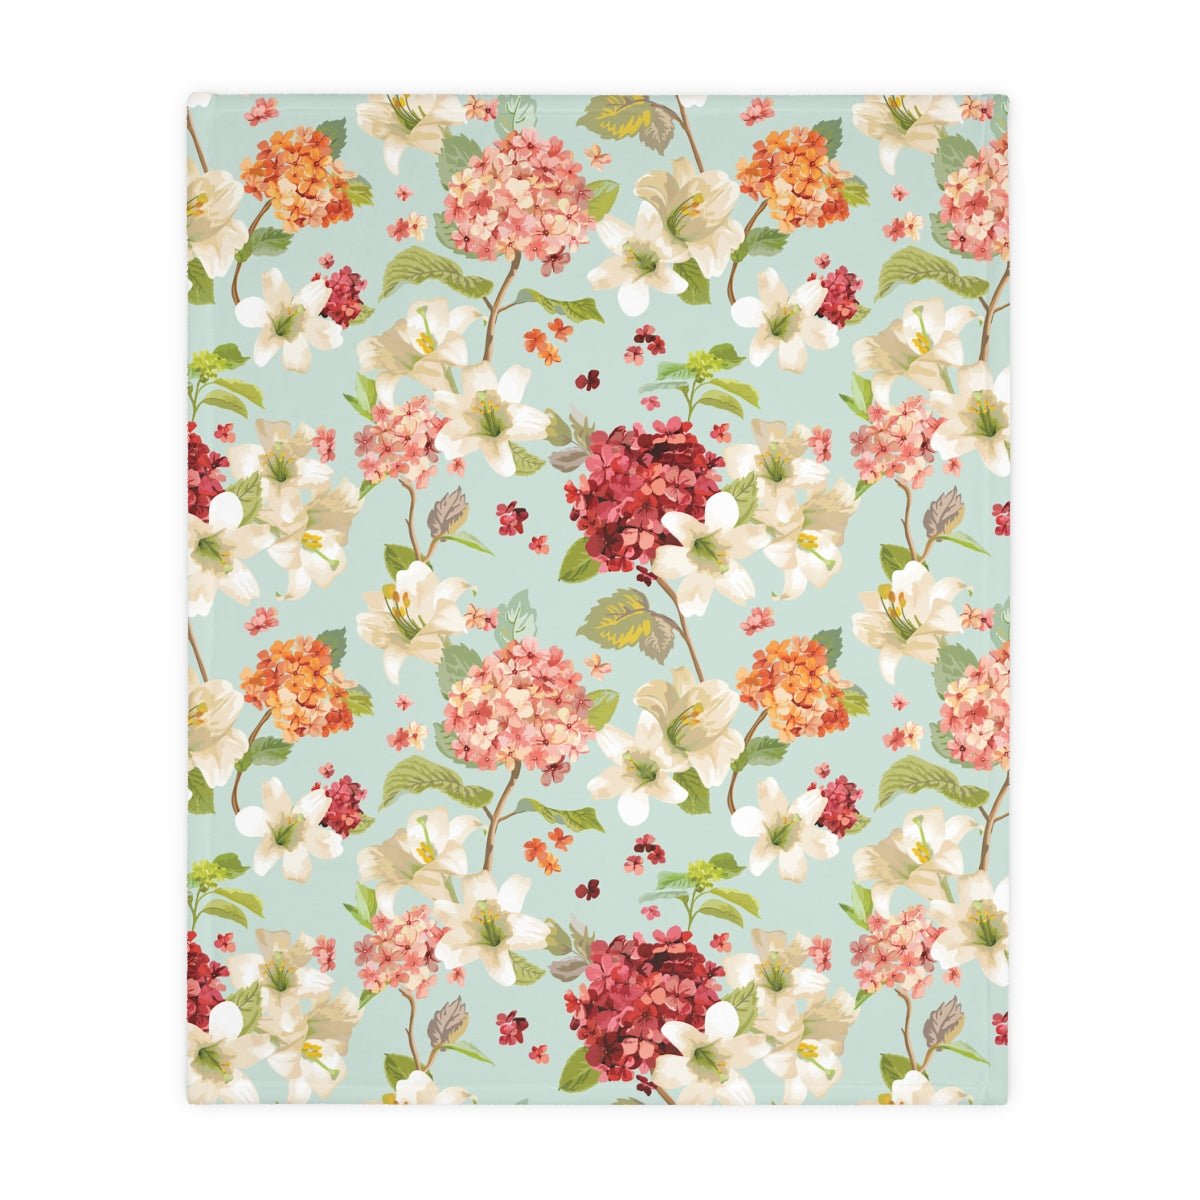 Autumn Hortensia and Lily Flowers Velveteen Minky Blanket (Two-sided print) - Puffin Lime